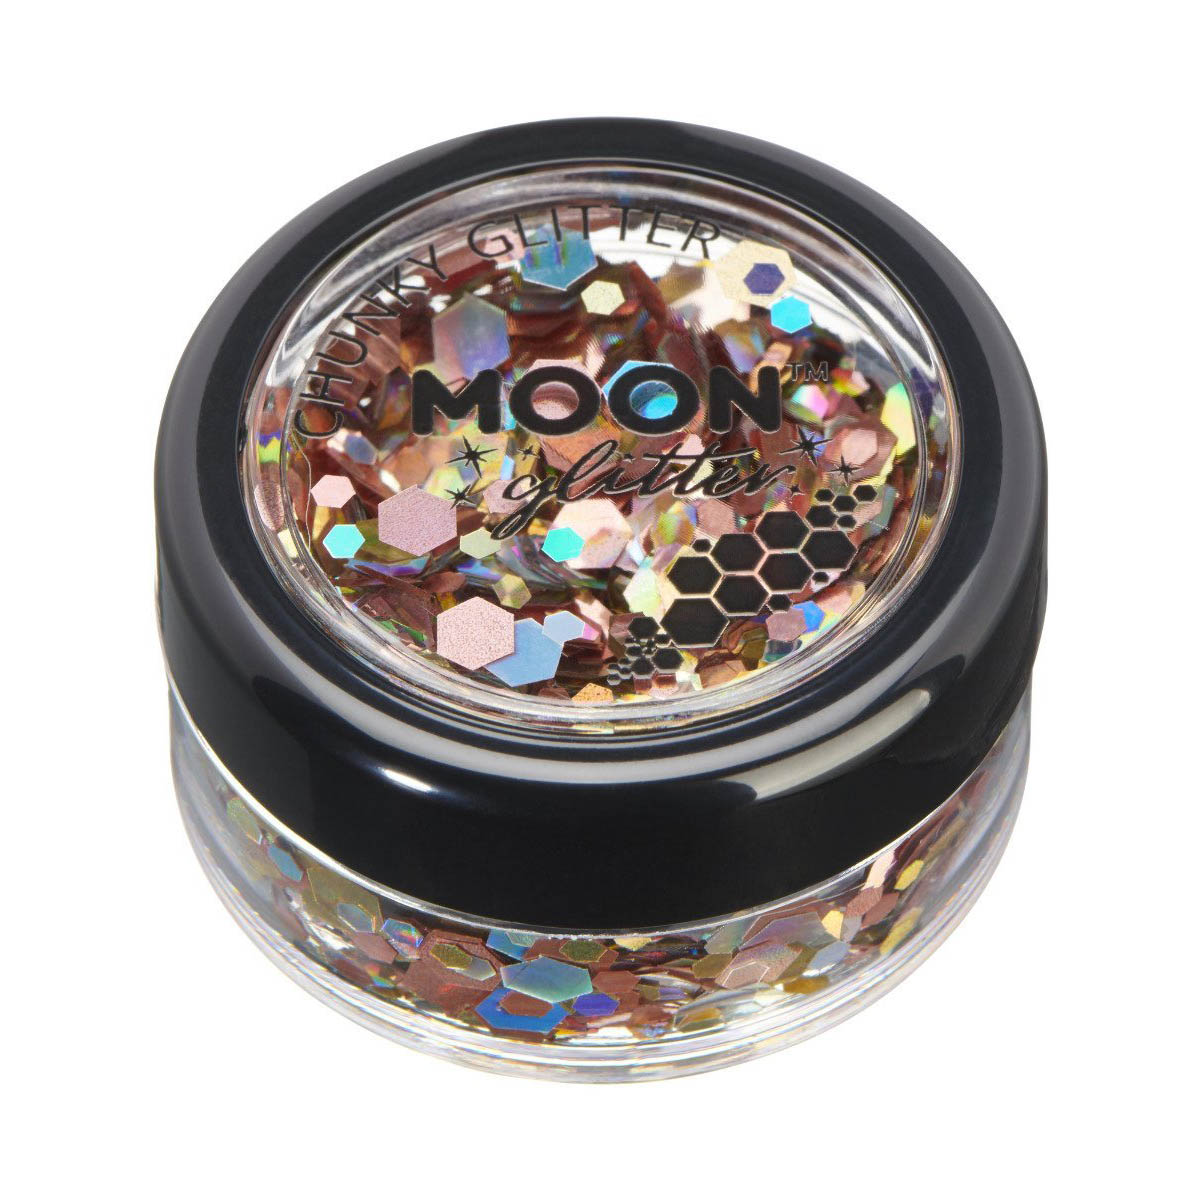 Moon mystic glitter chunky mix flakes 3 g Prosecco